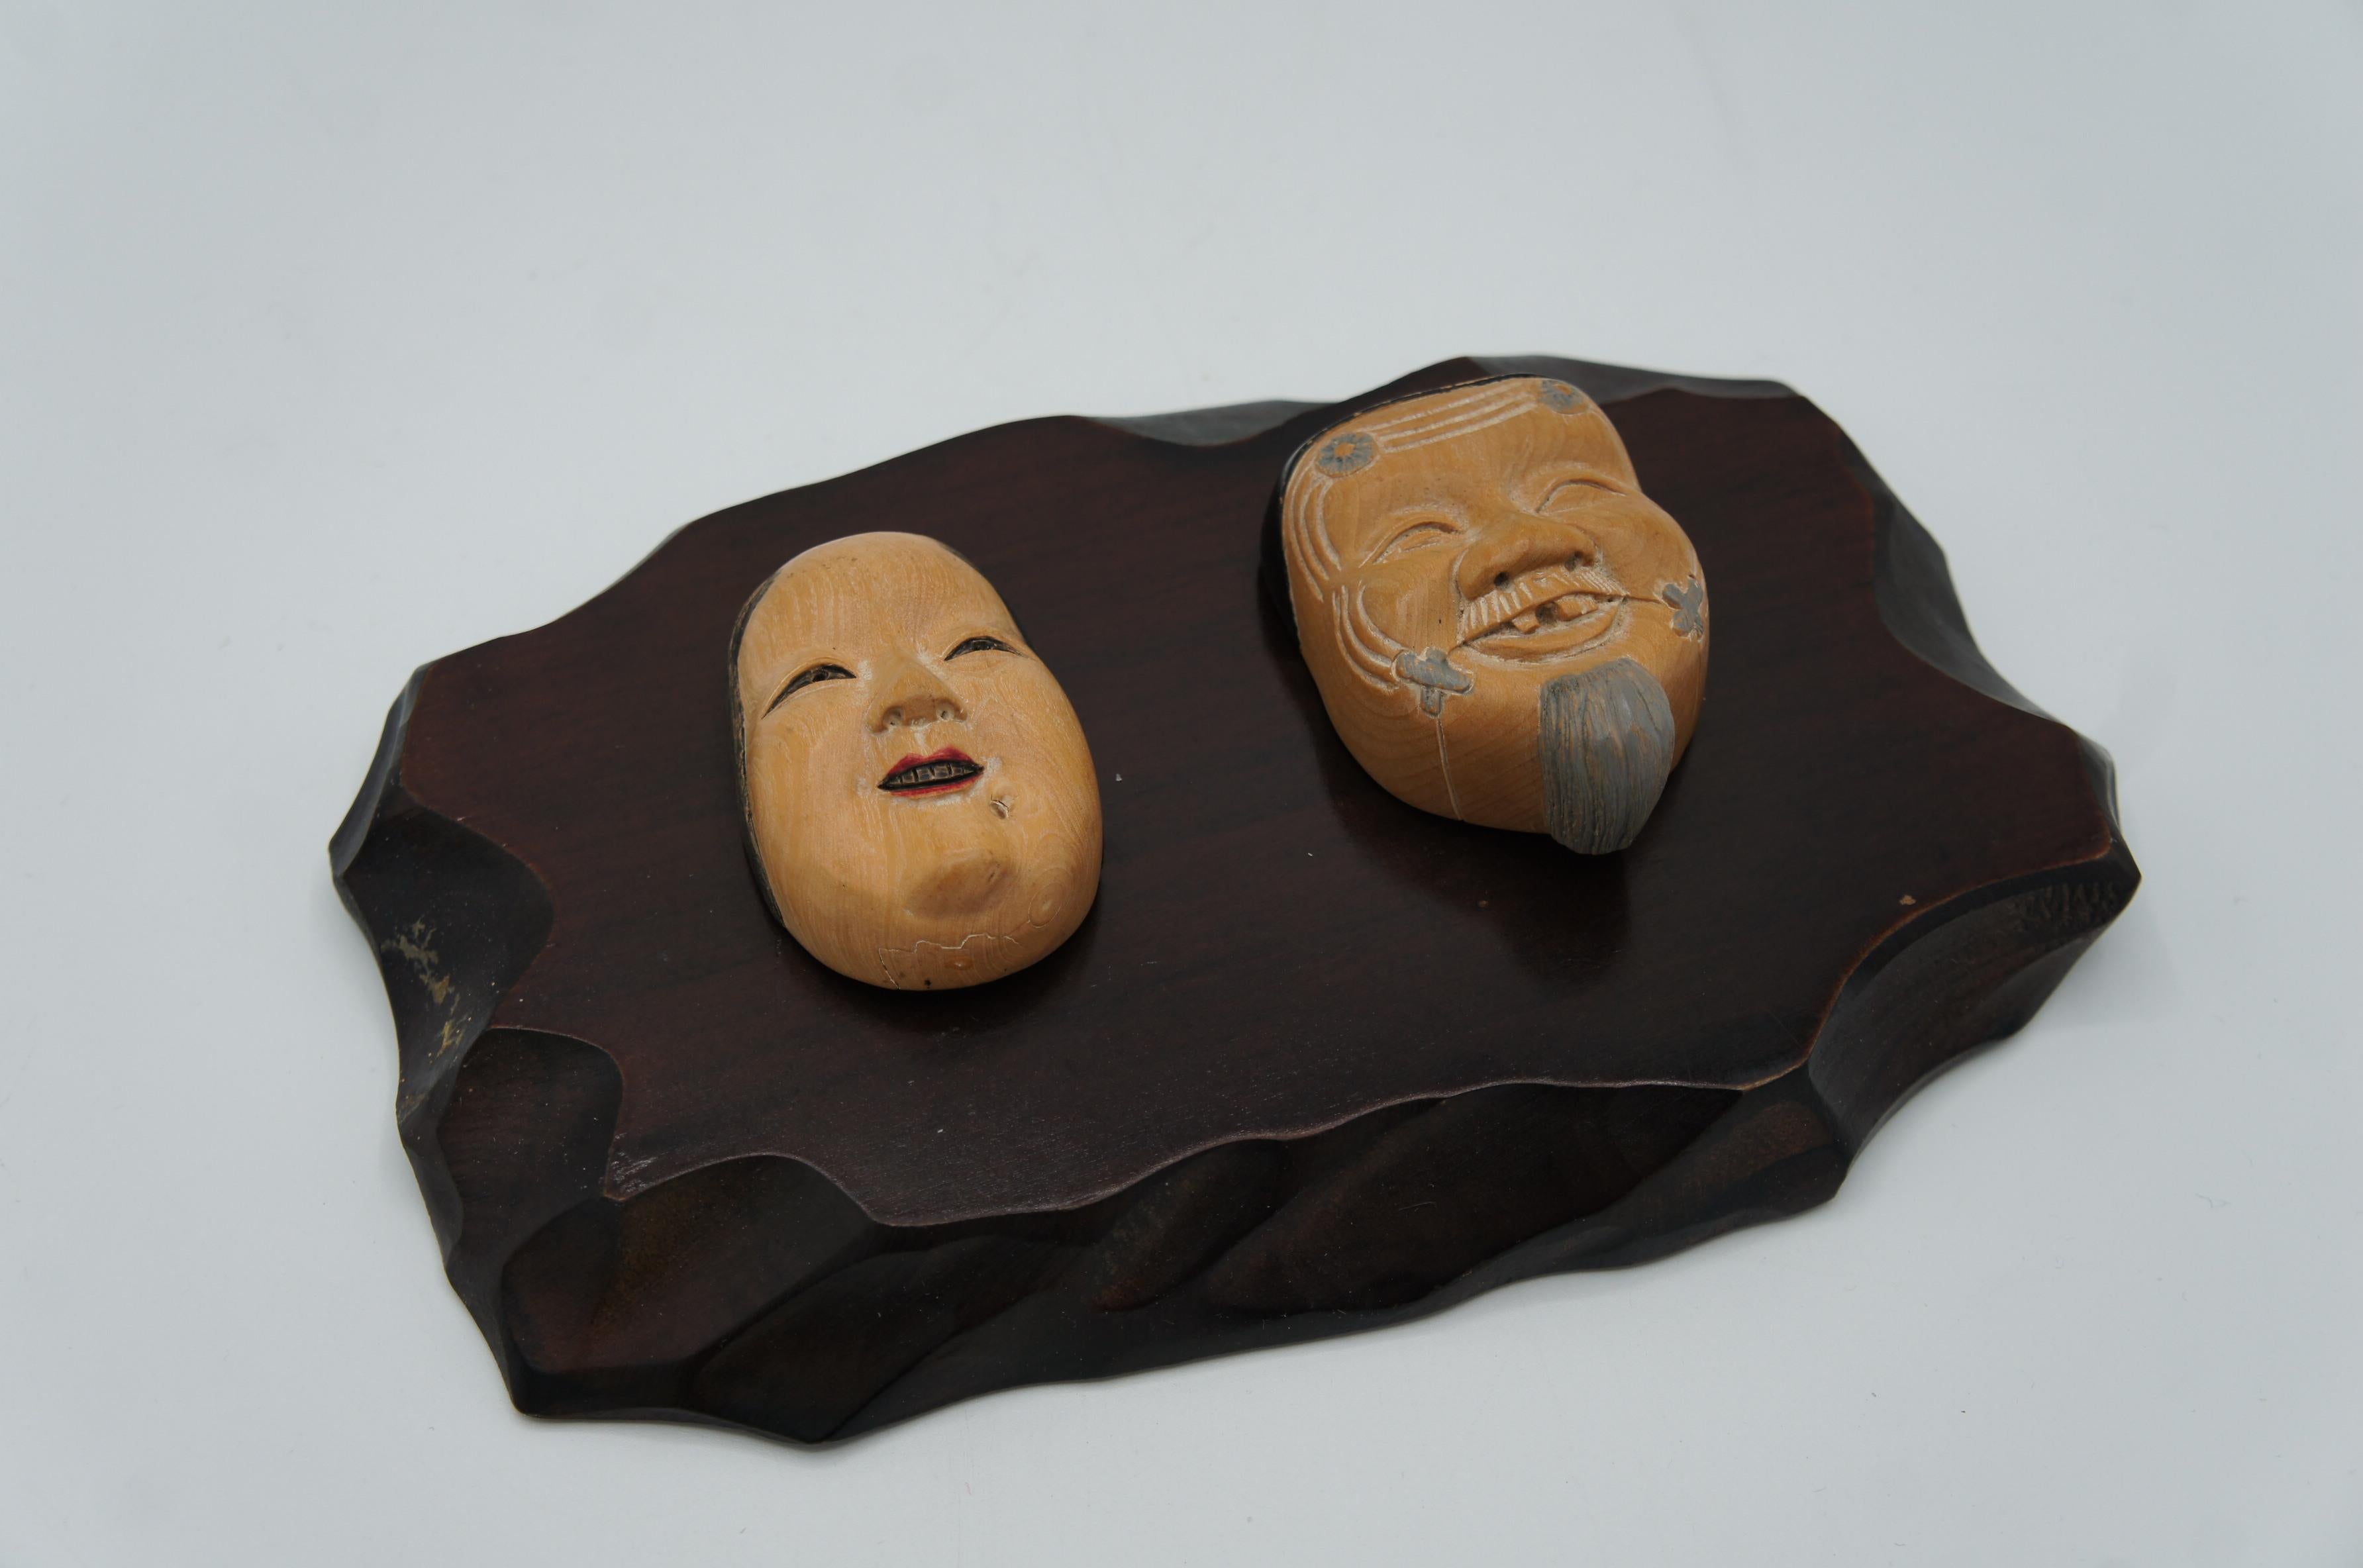 These are wooden netsukes made in Japan around showa period 1980s.
One is called 'Onnamen' and there one is called 'Okinamen'.
These are masks that we use during Noh theater. 

Netsuke is a miniature sculpture, originating in 17th century